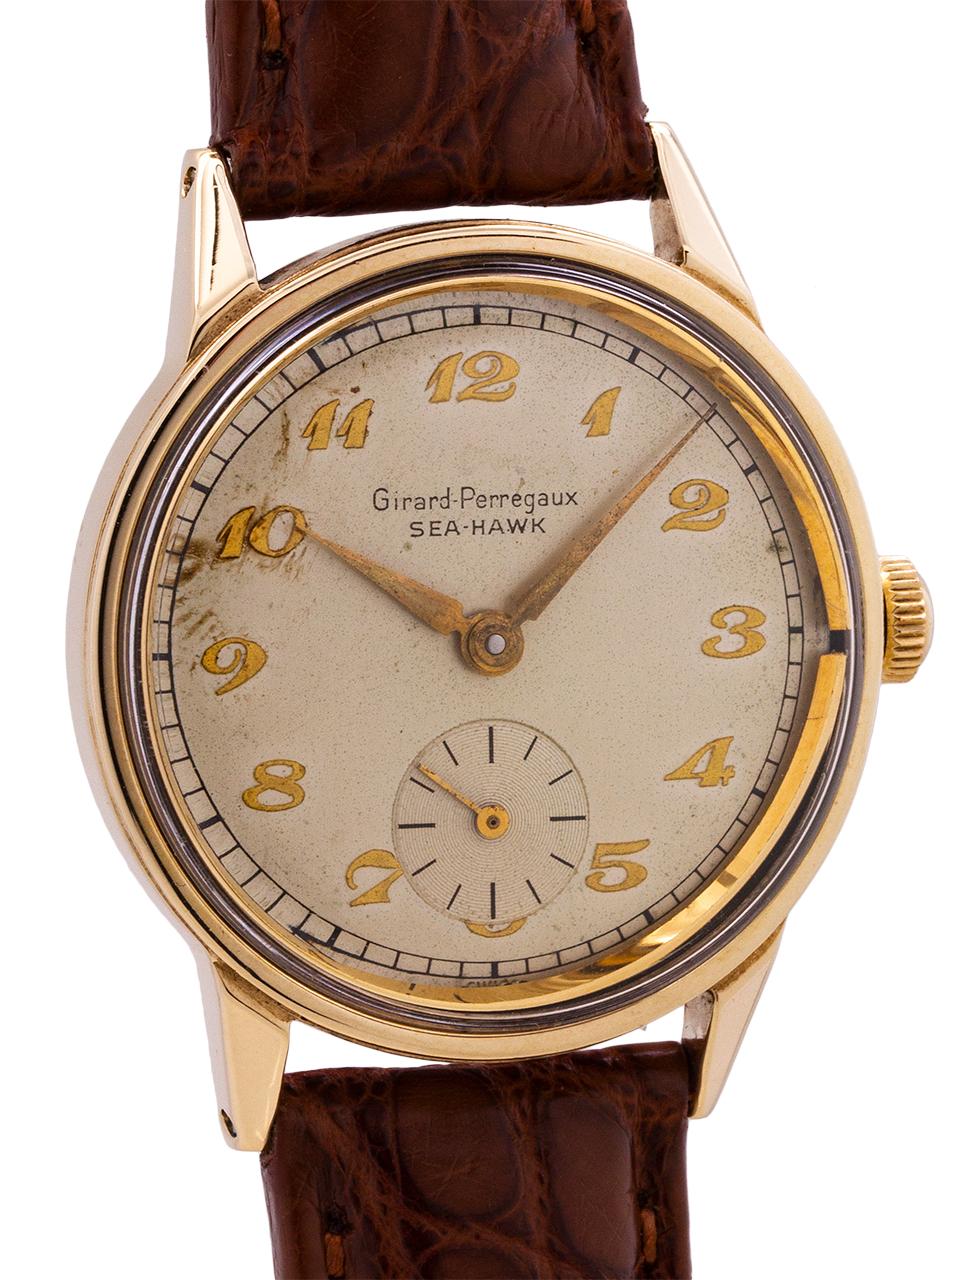 
Vintage Girard Perregaux Sea Hawk 14K gold top with stainless steel case back circa 1940's. Featuring a 33mm diameter case with acrylic crystal and very pleasing original antique white dial with applied gold Breguet style figures and gilt leaf